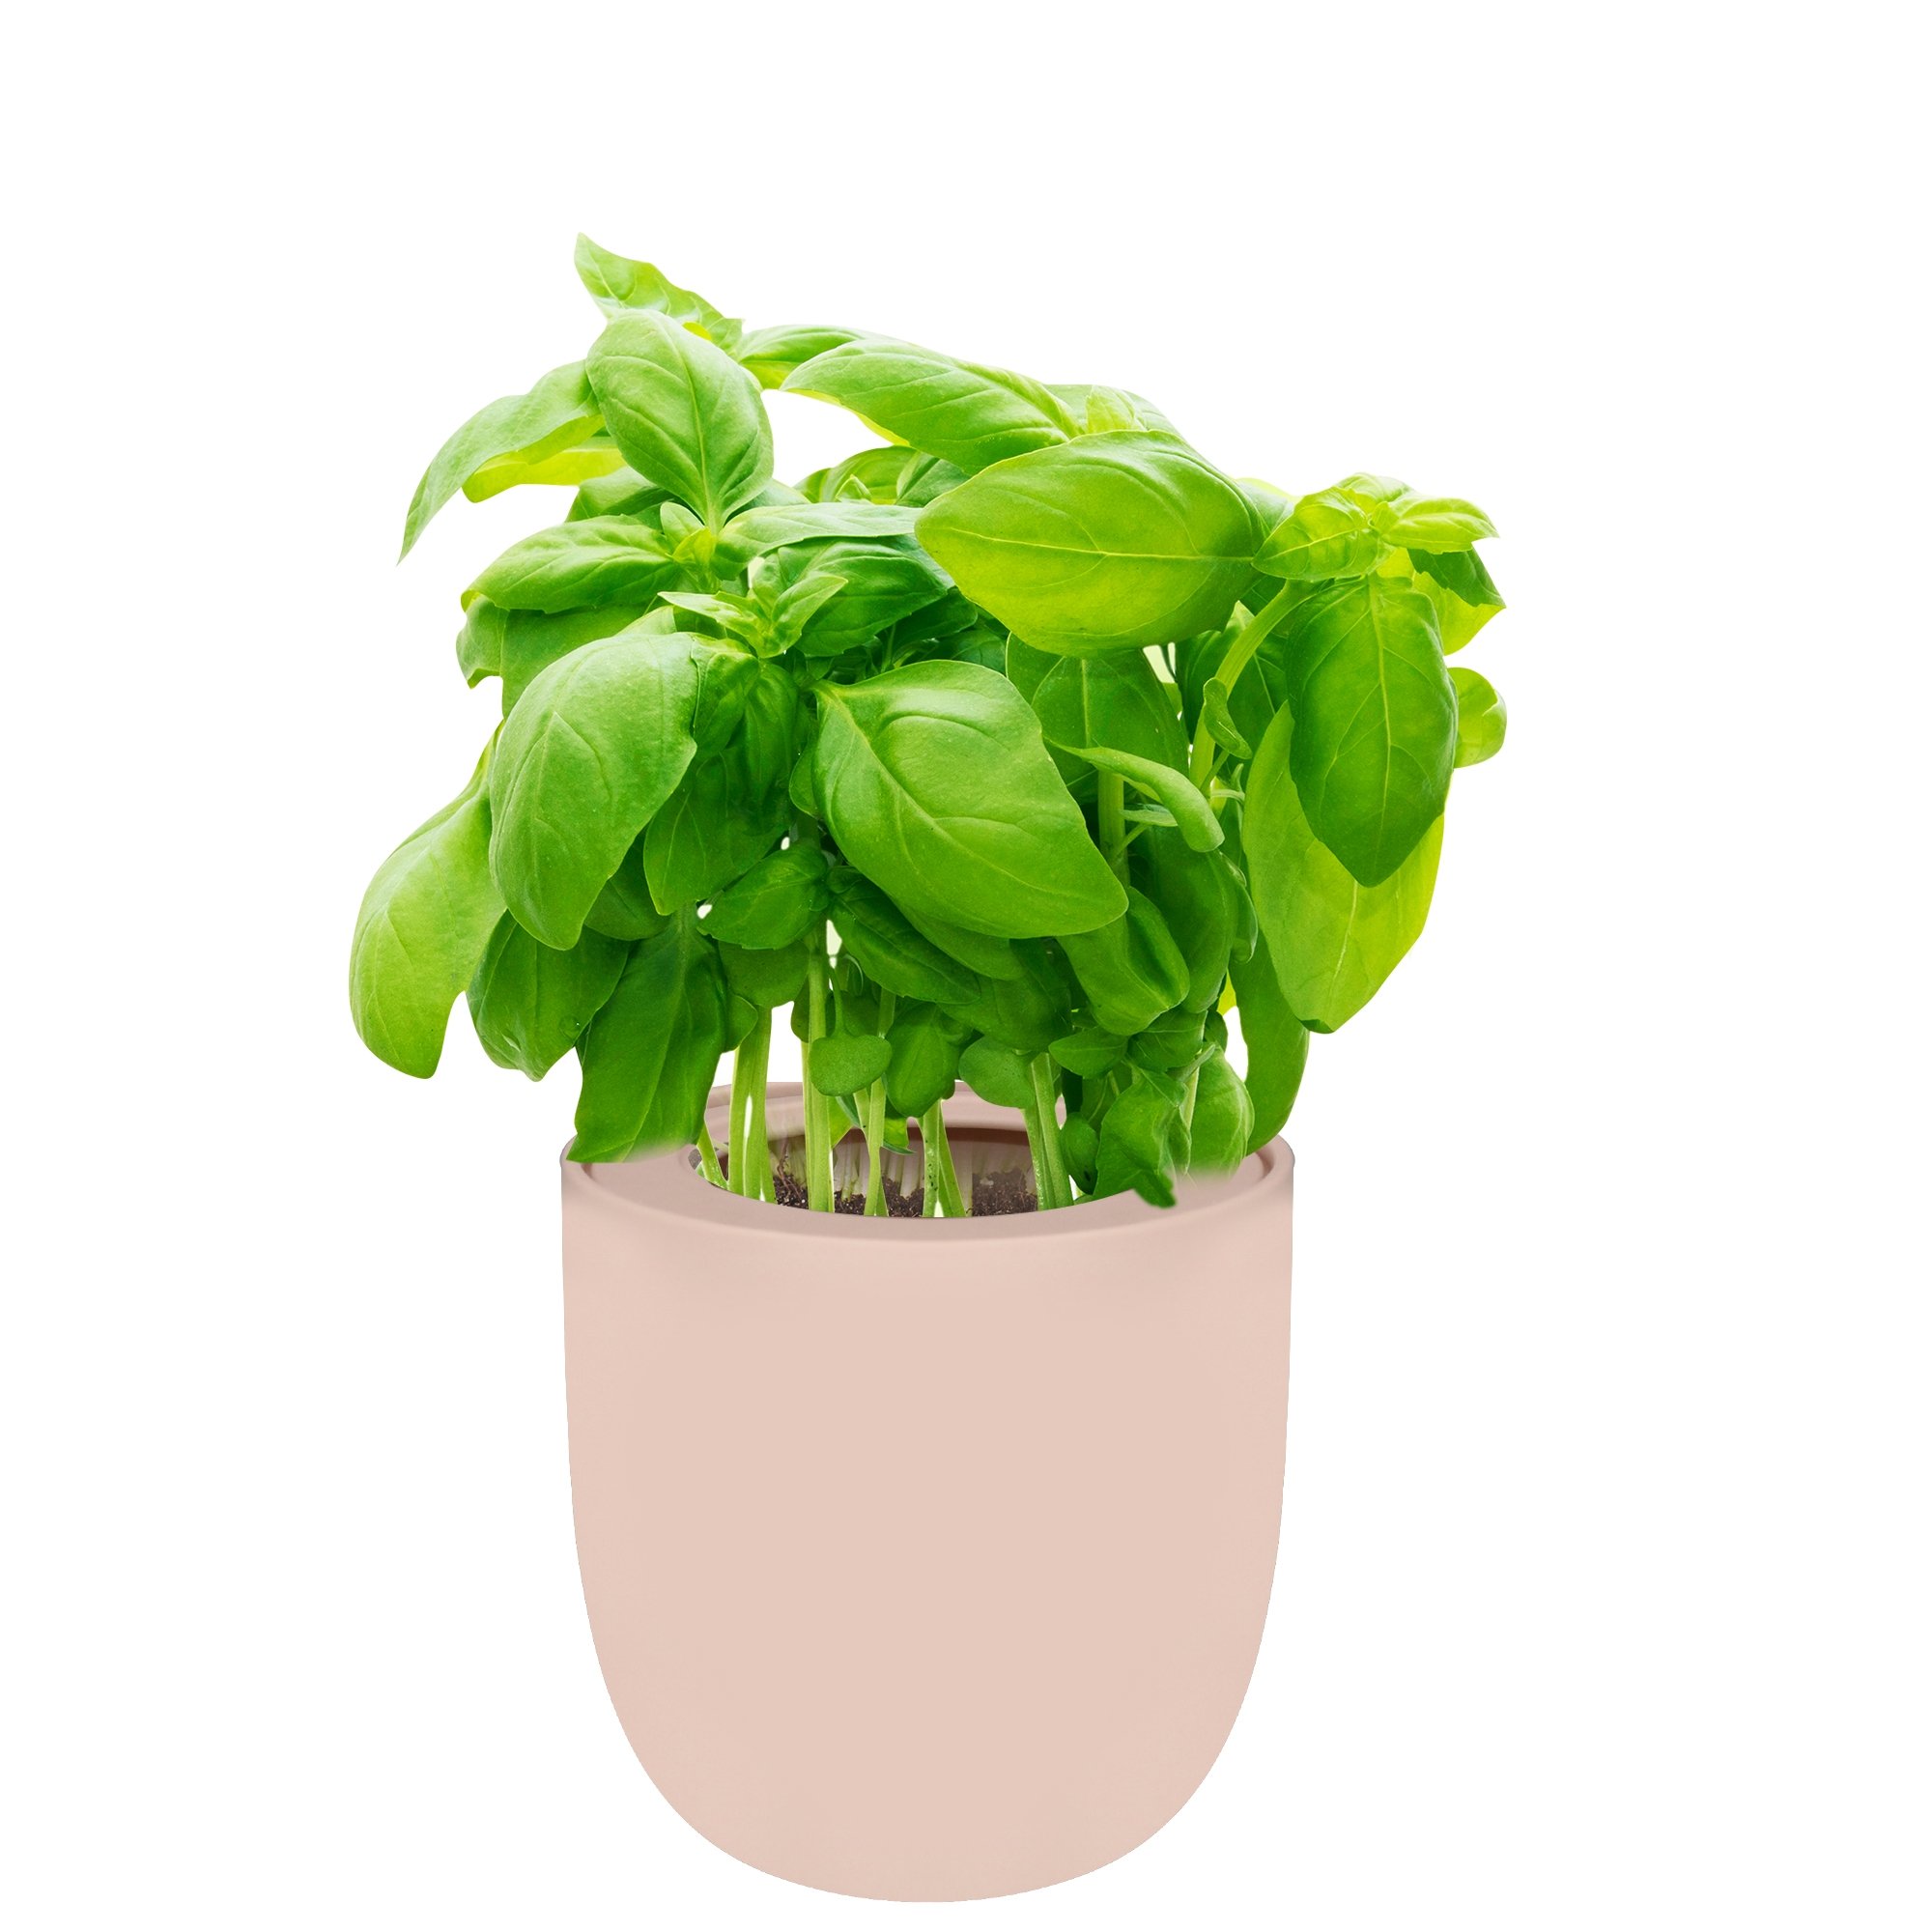 Hydroponic Herb Growing Kit With Pink Ceramic Pot and Organic Seeds (Basil)